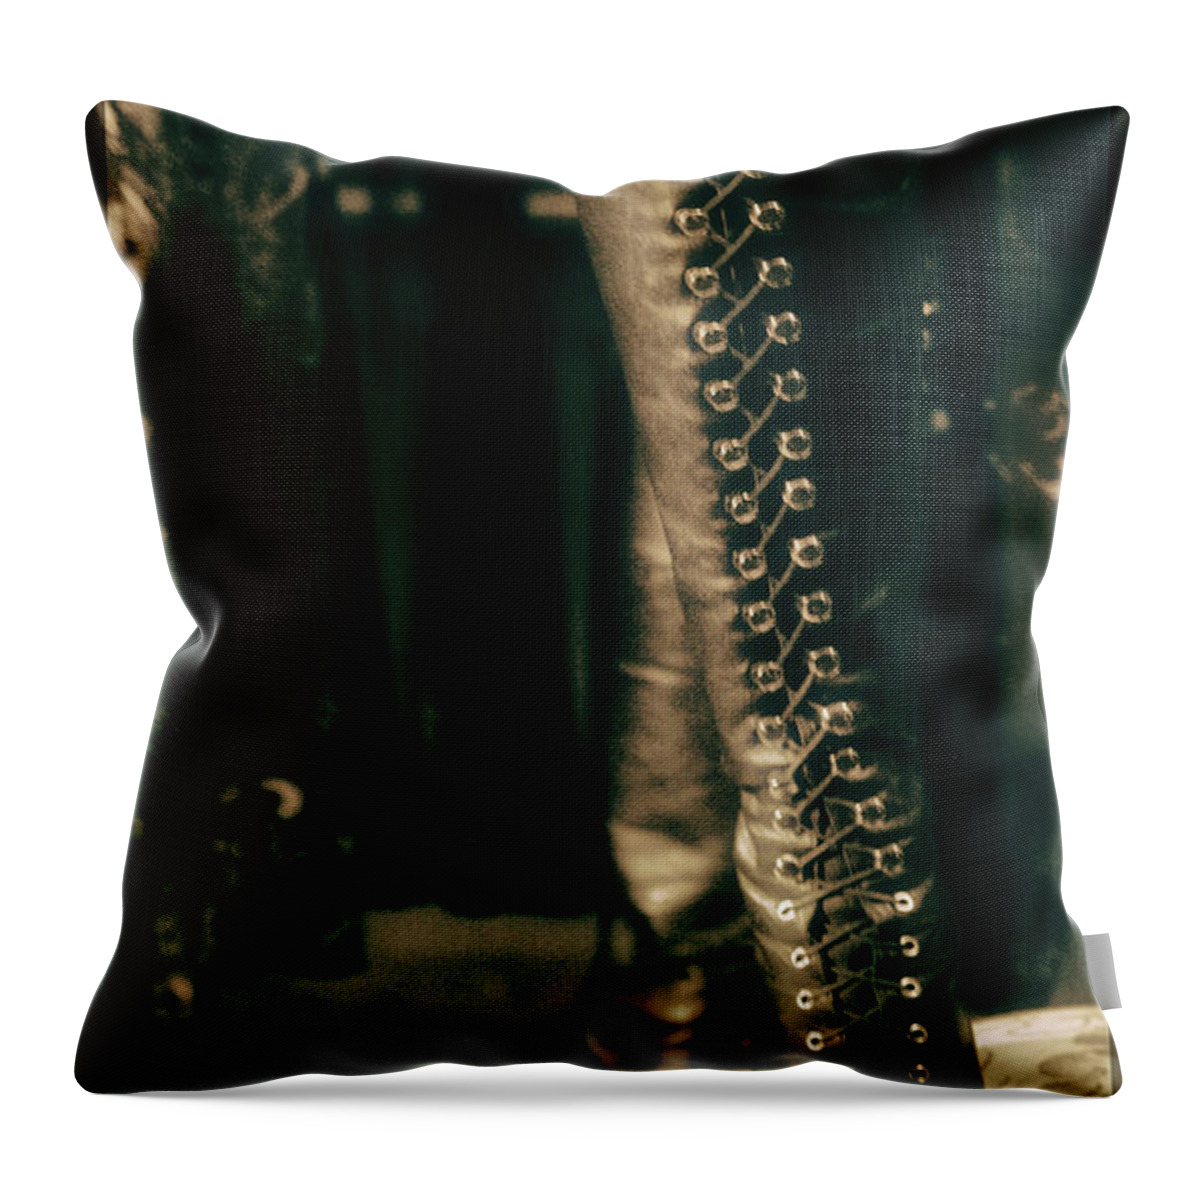 Fetish Throw Pillow featuring the photograph Fetish by Cynthia Dickinson